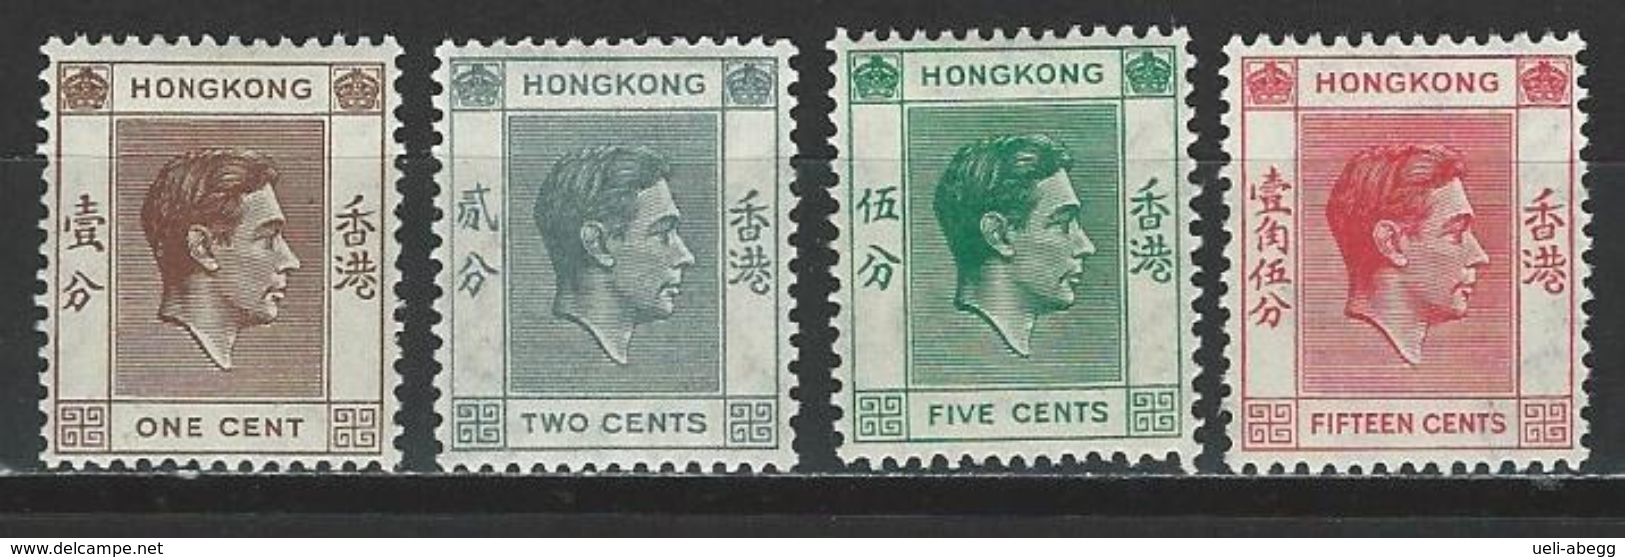 Hong Kong SG 140, 141, 143, 146, Mi 139, 140A, 142A, 145 * MH Perf. 14 - Unused Stamps